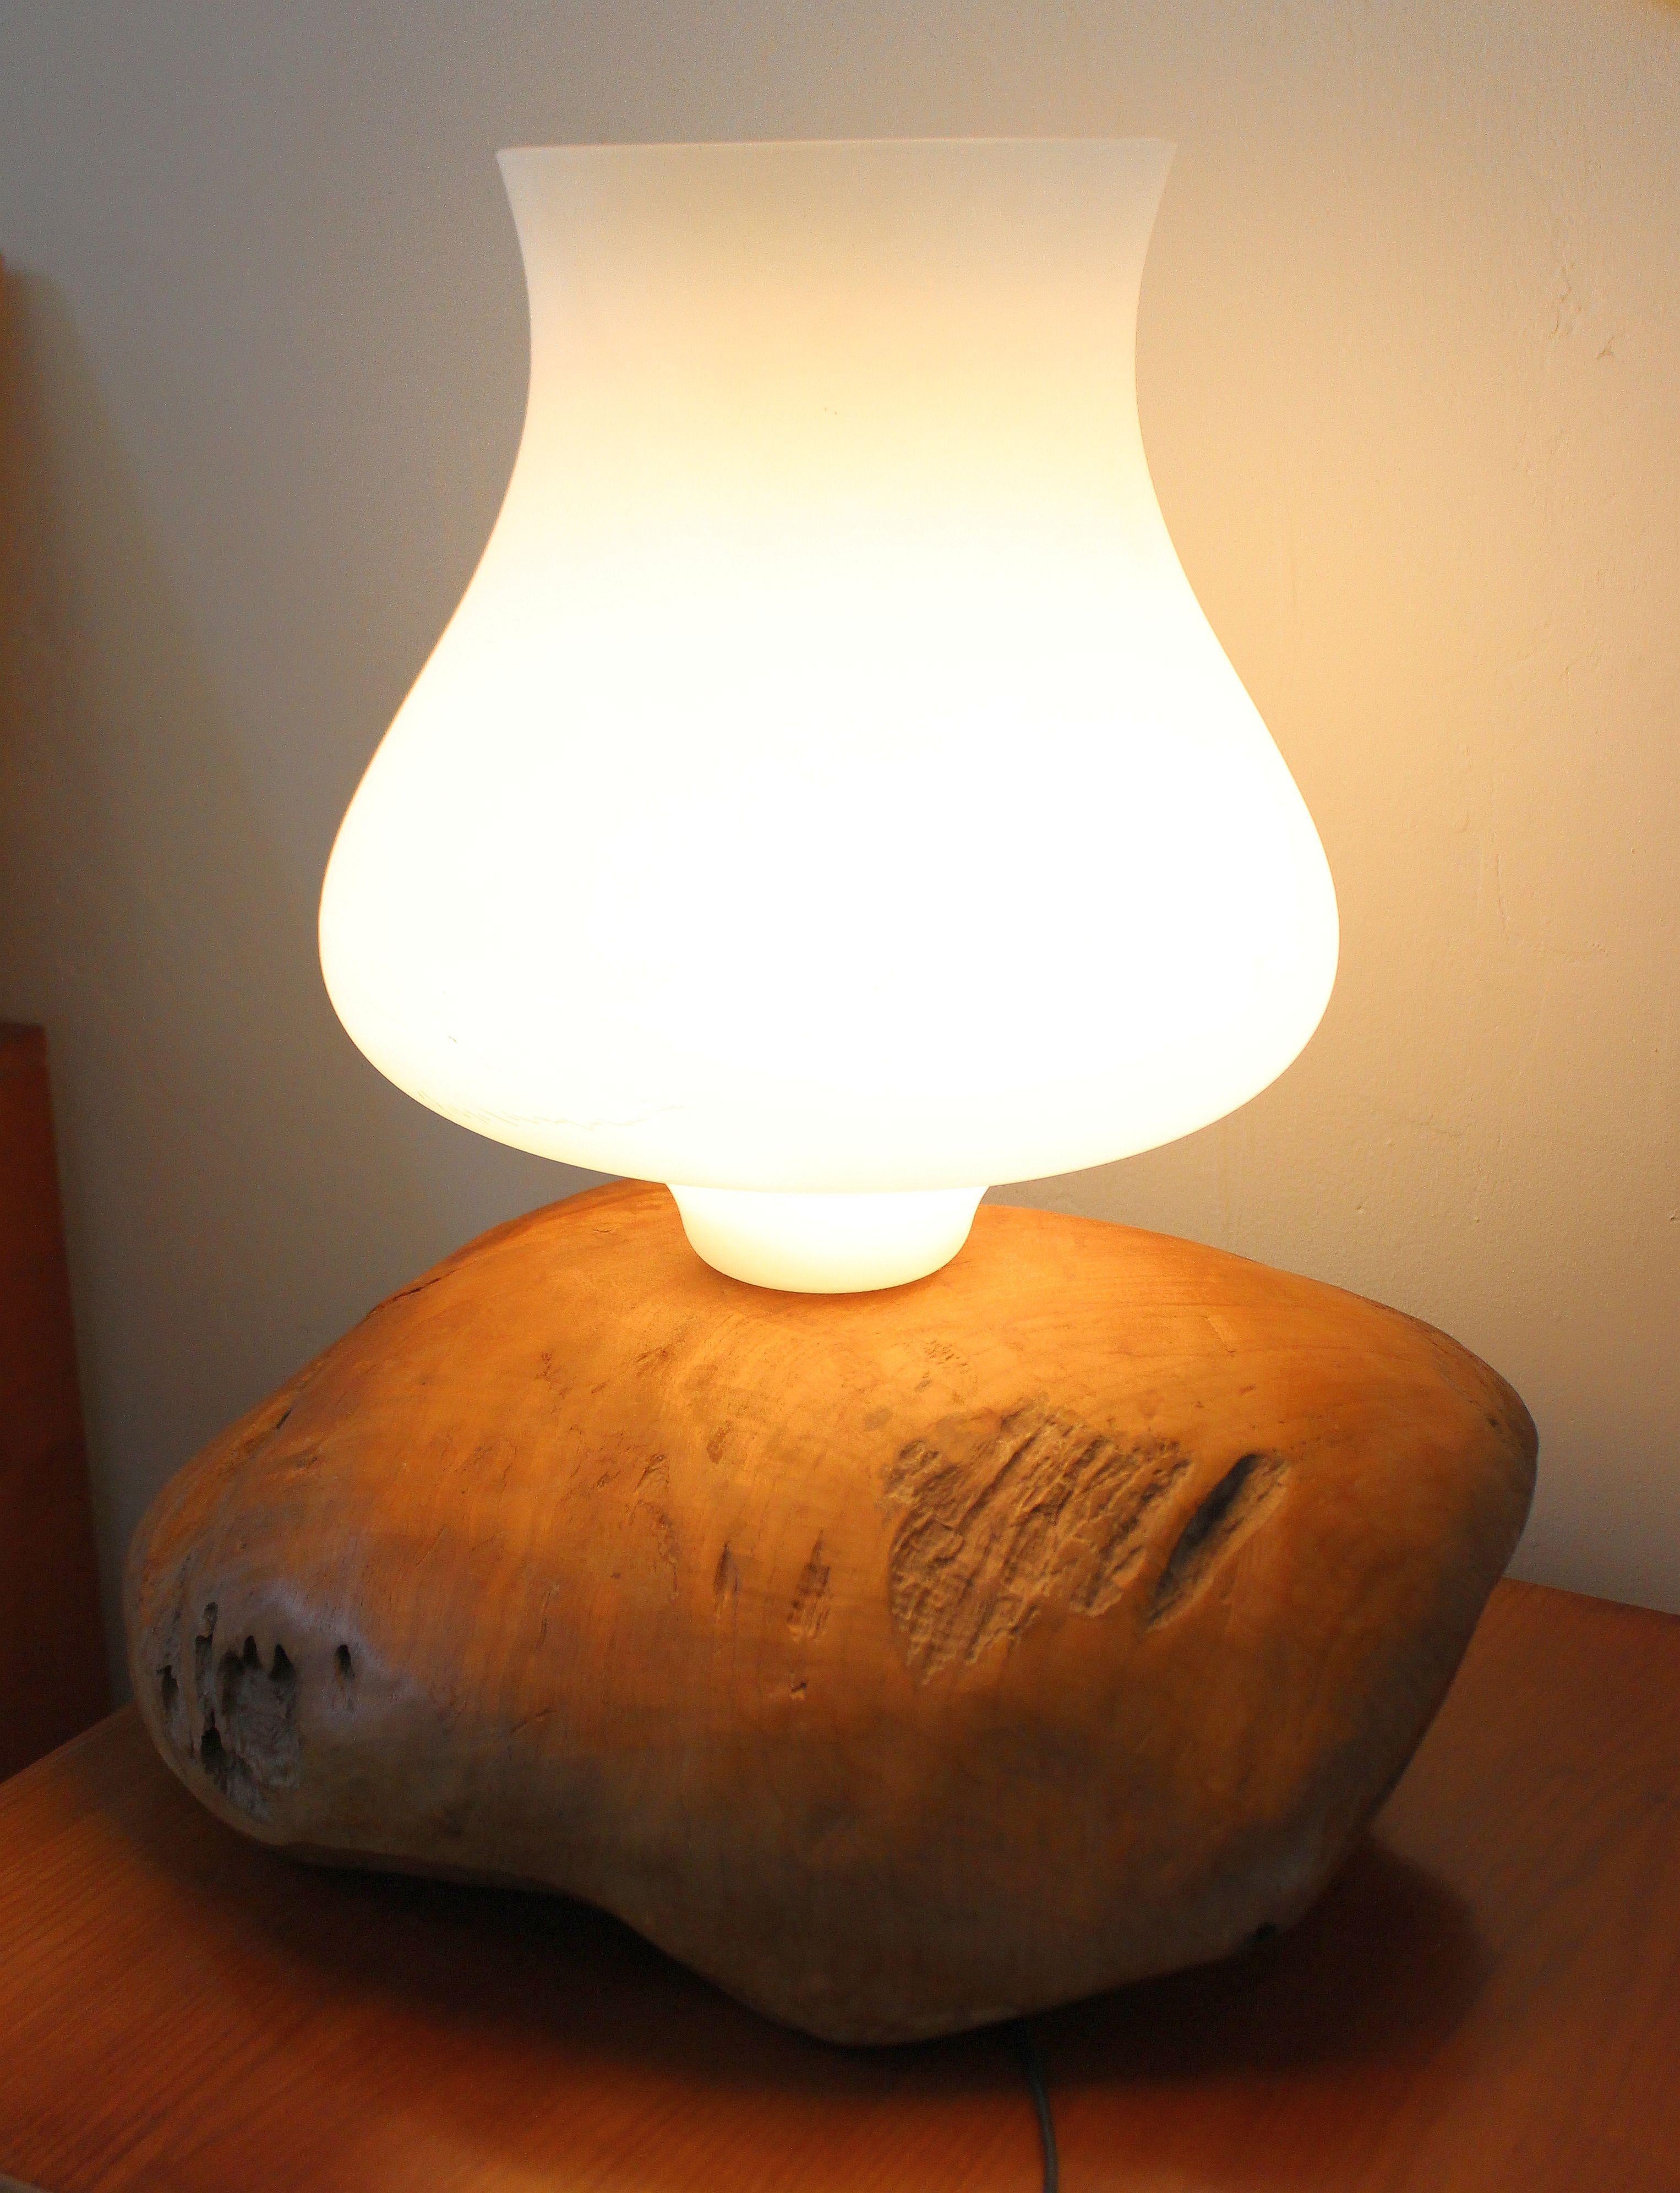 Italian table lamp by Gimo Fero Venation artist .Because of the size of the light fixtures it could be a floor lamp. Table lamp base is from the fallen long ago trees, and possible Olive tree. Murano white opaline glass shade.